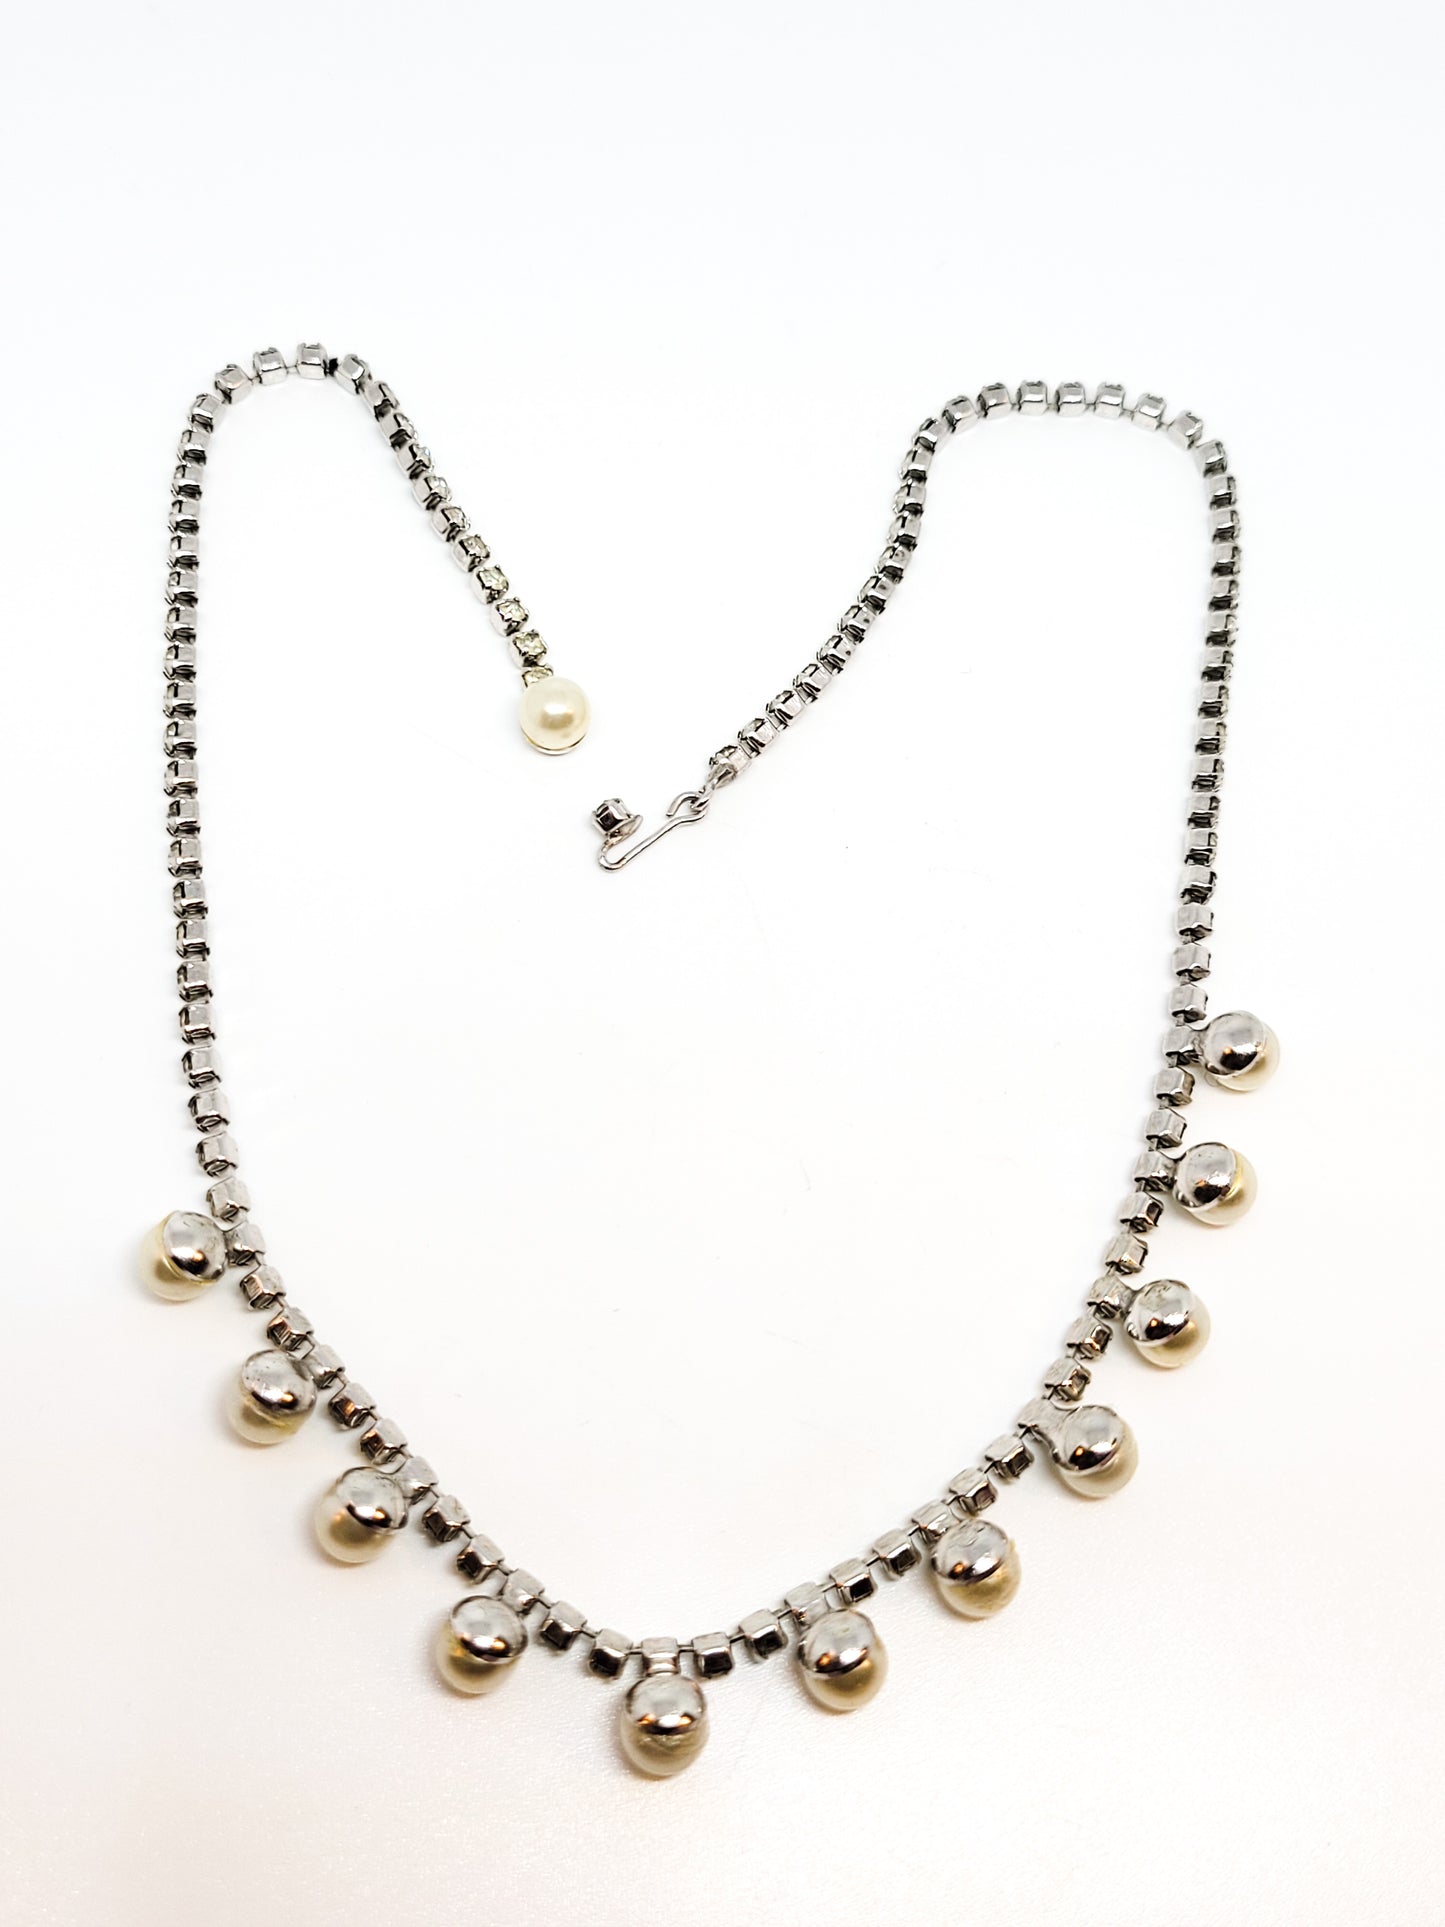 Retro clear rhinestone and faux cream pearl single strand vintage statement necklace